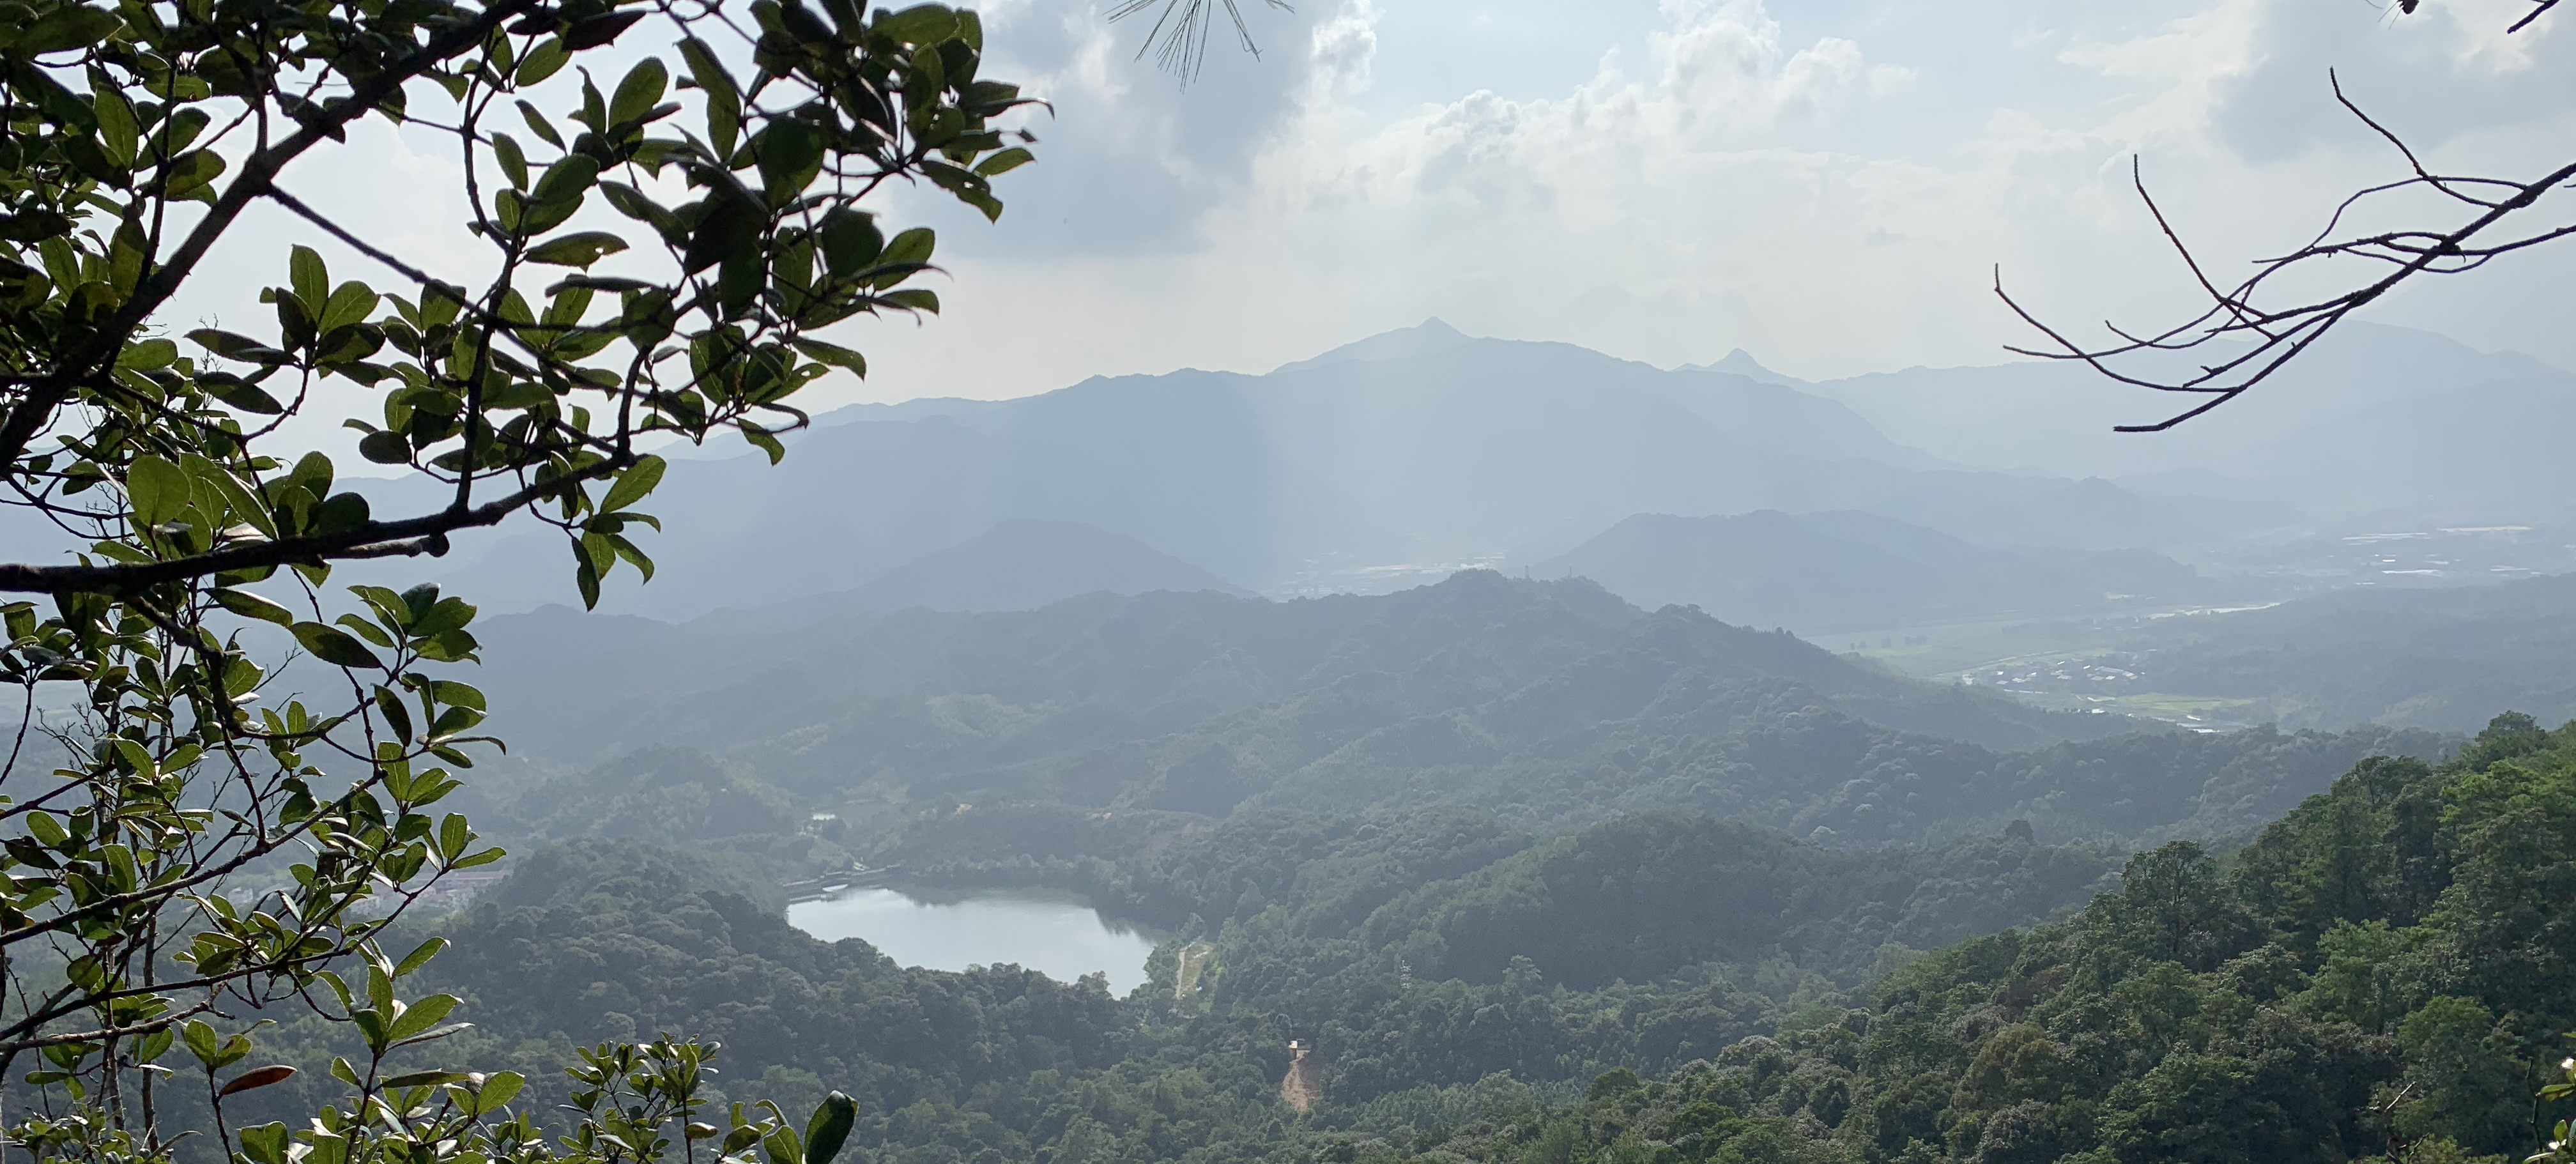 above view of Shunchang forest mountains in China